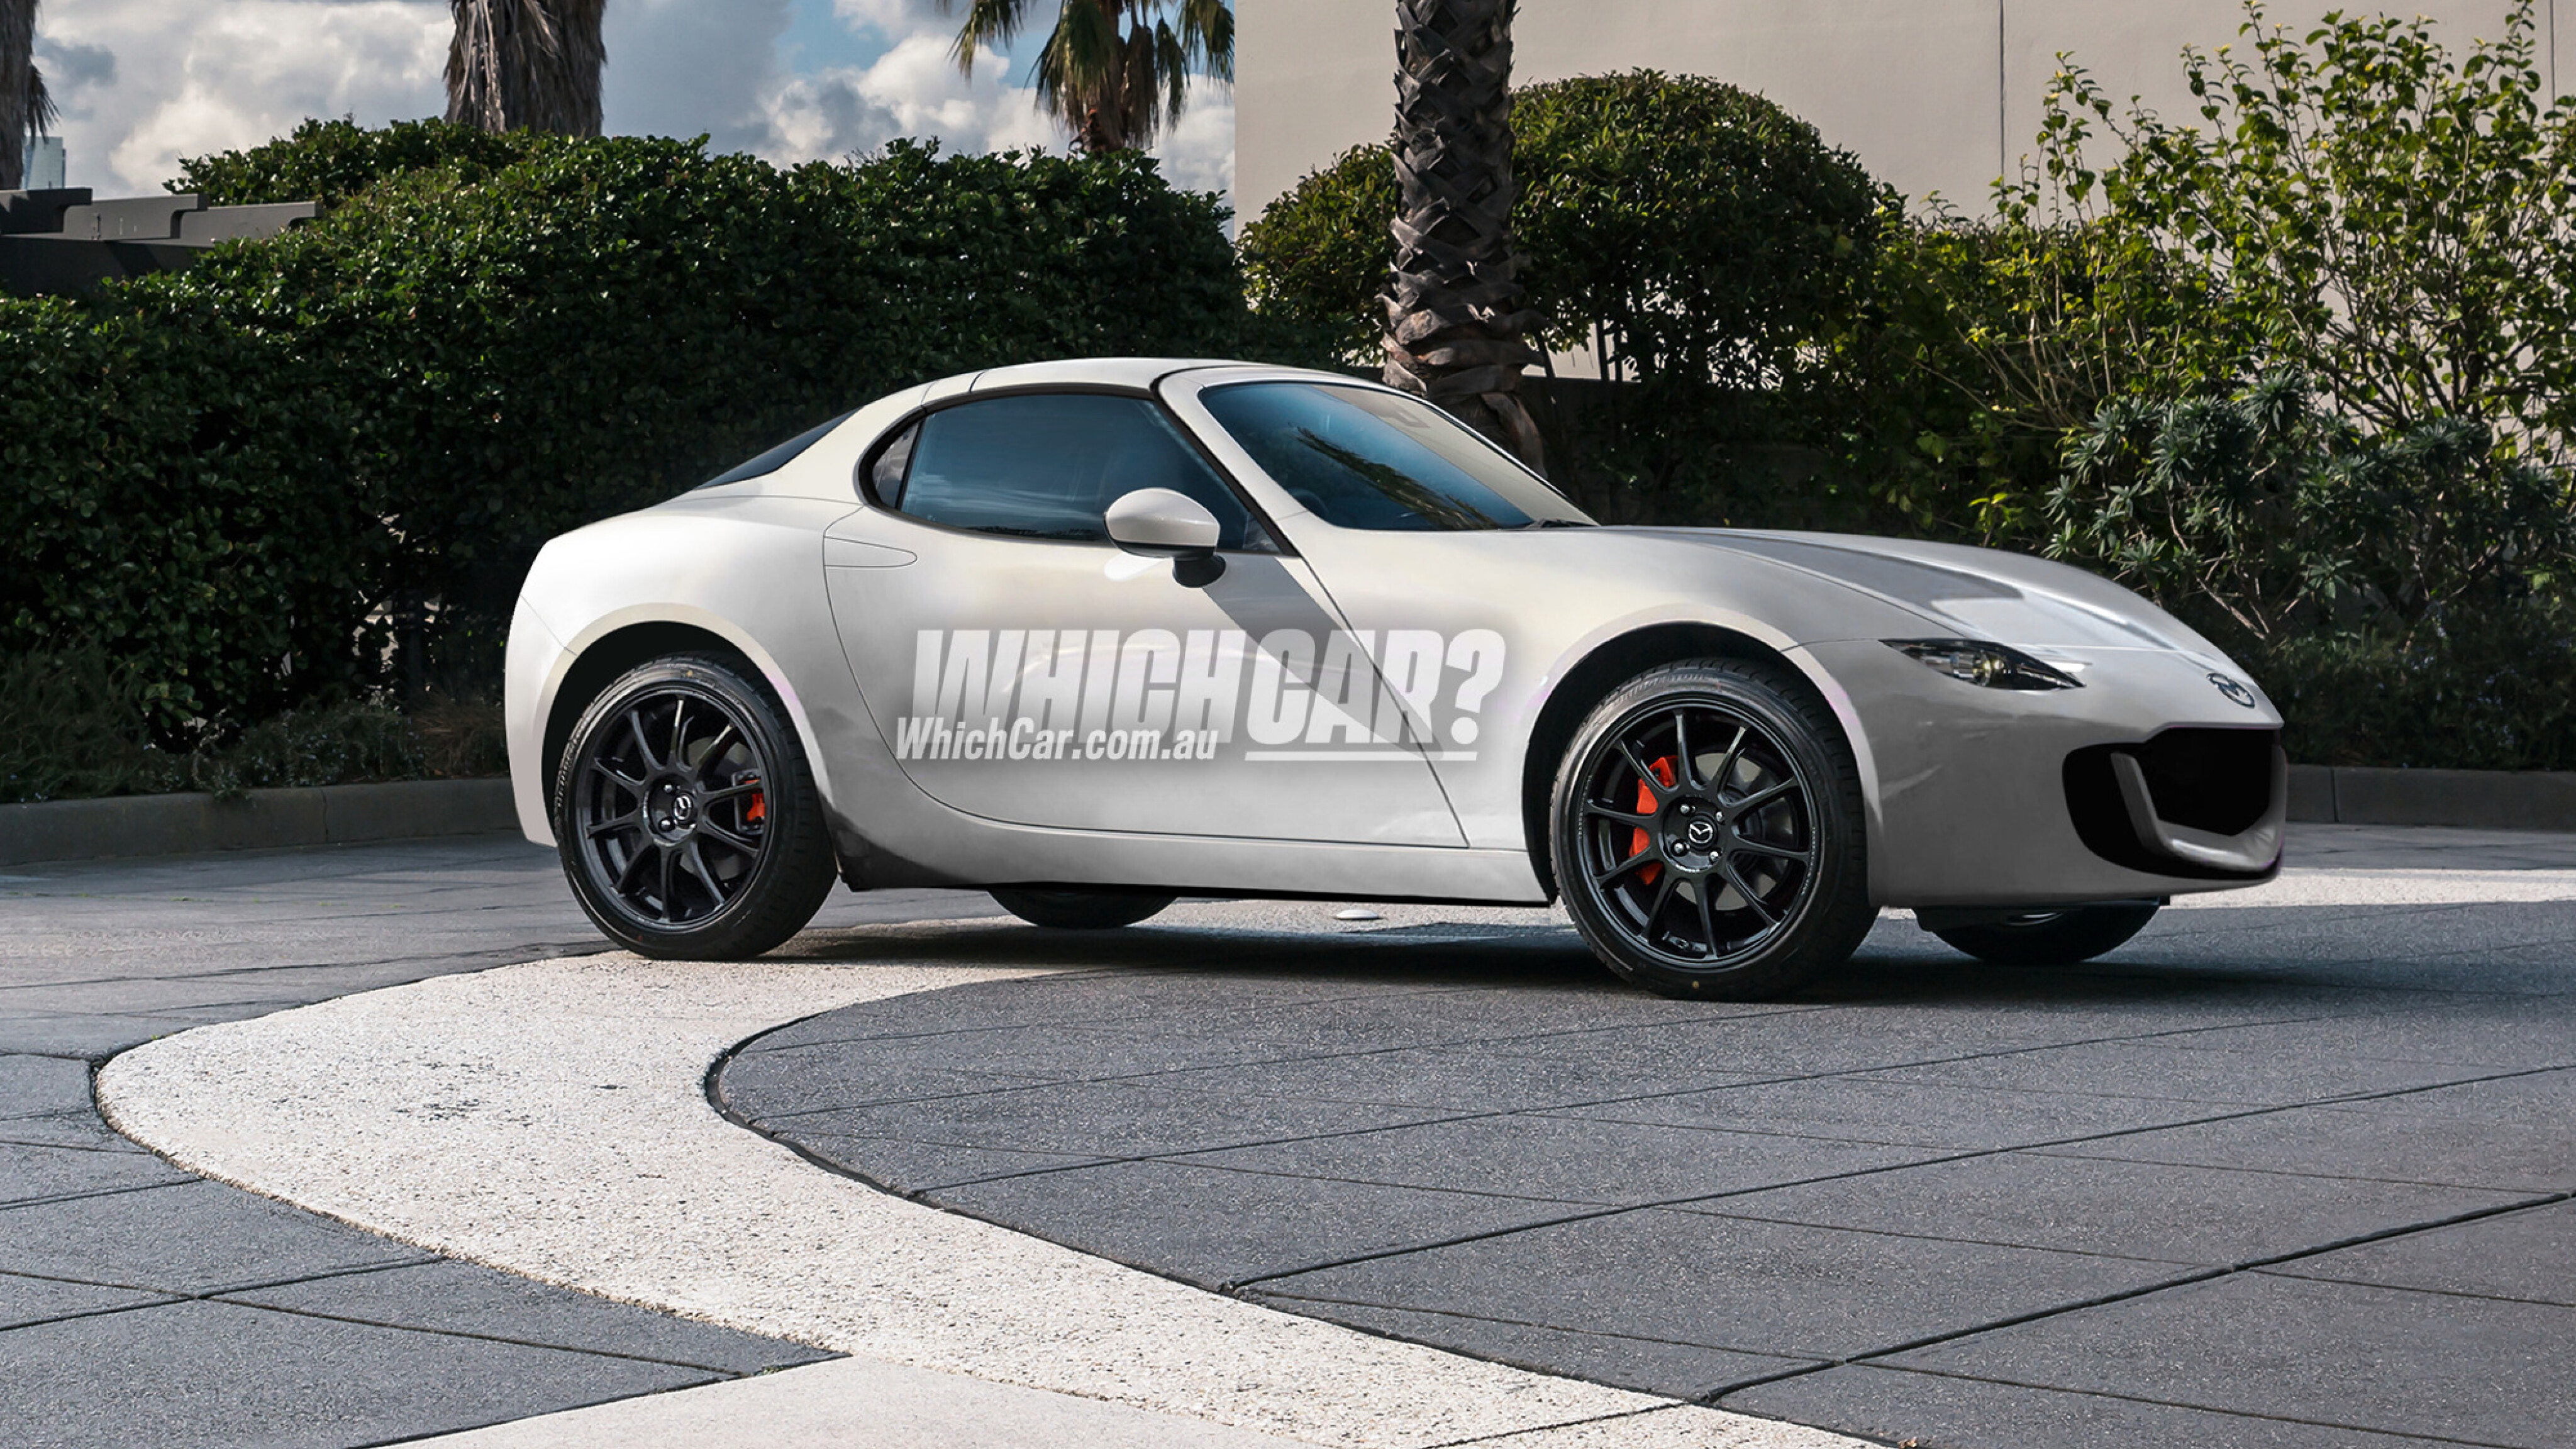 2026 Mazda MX-5 confirmed and imagined in new renders!